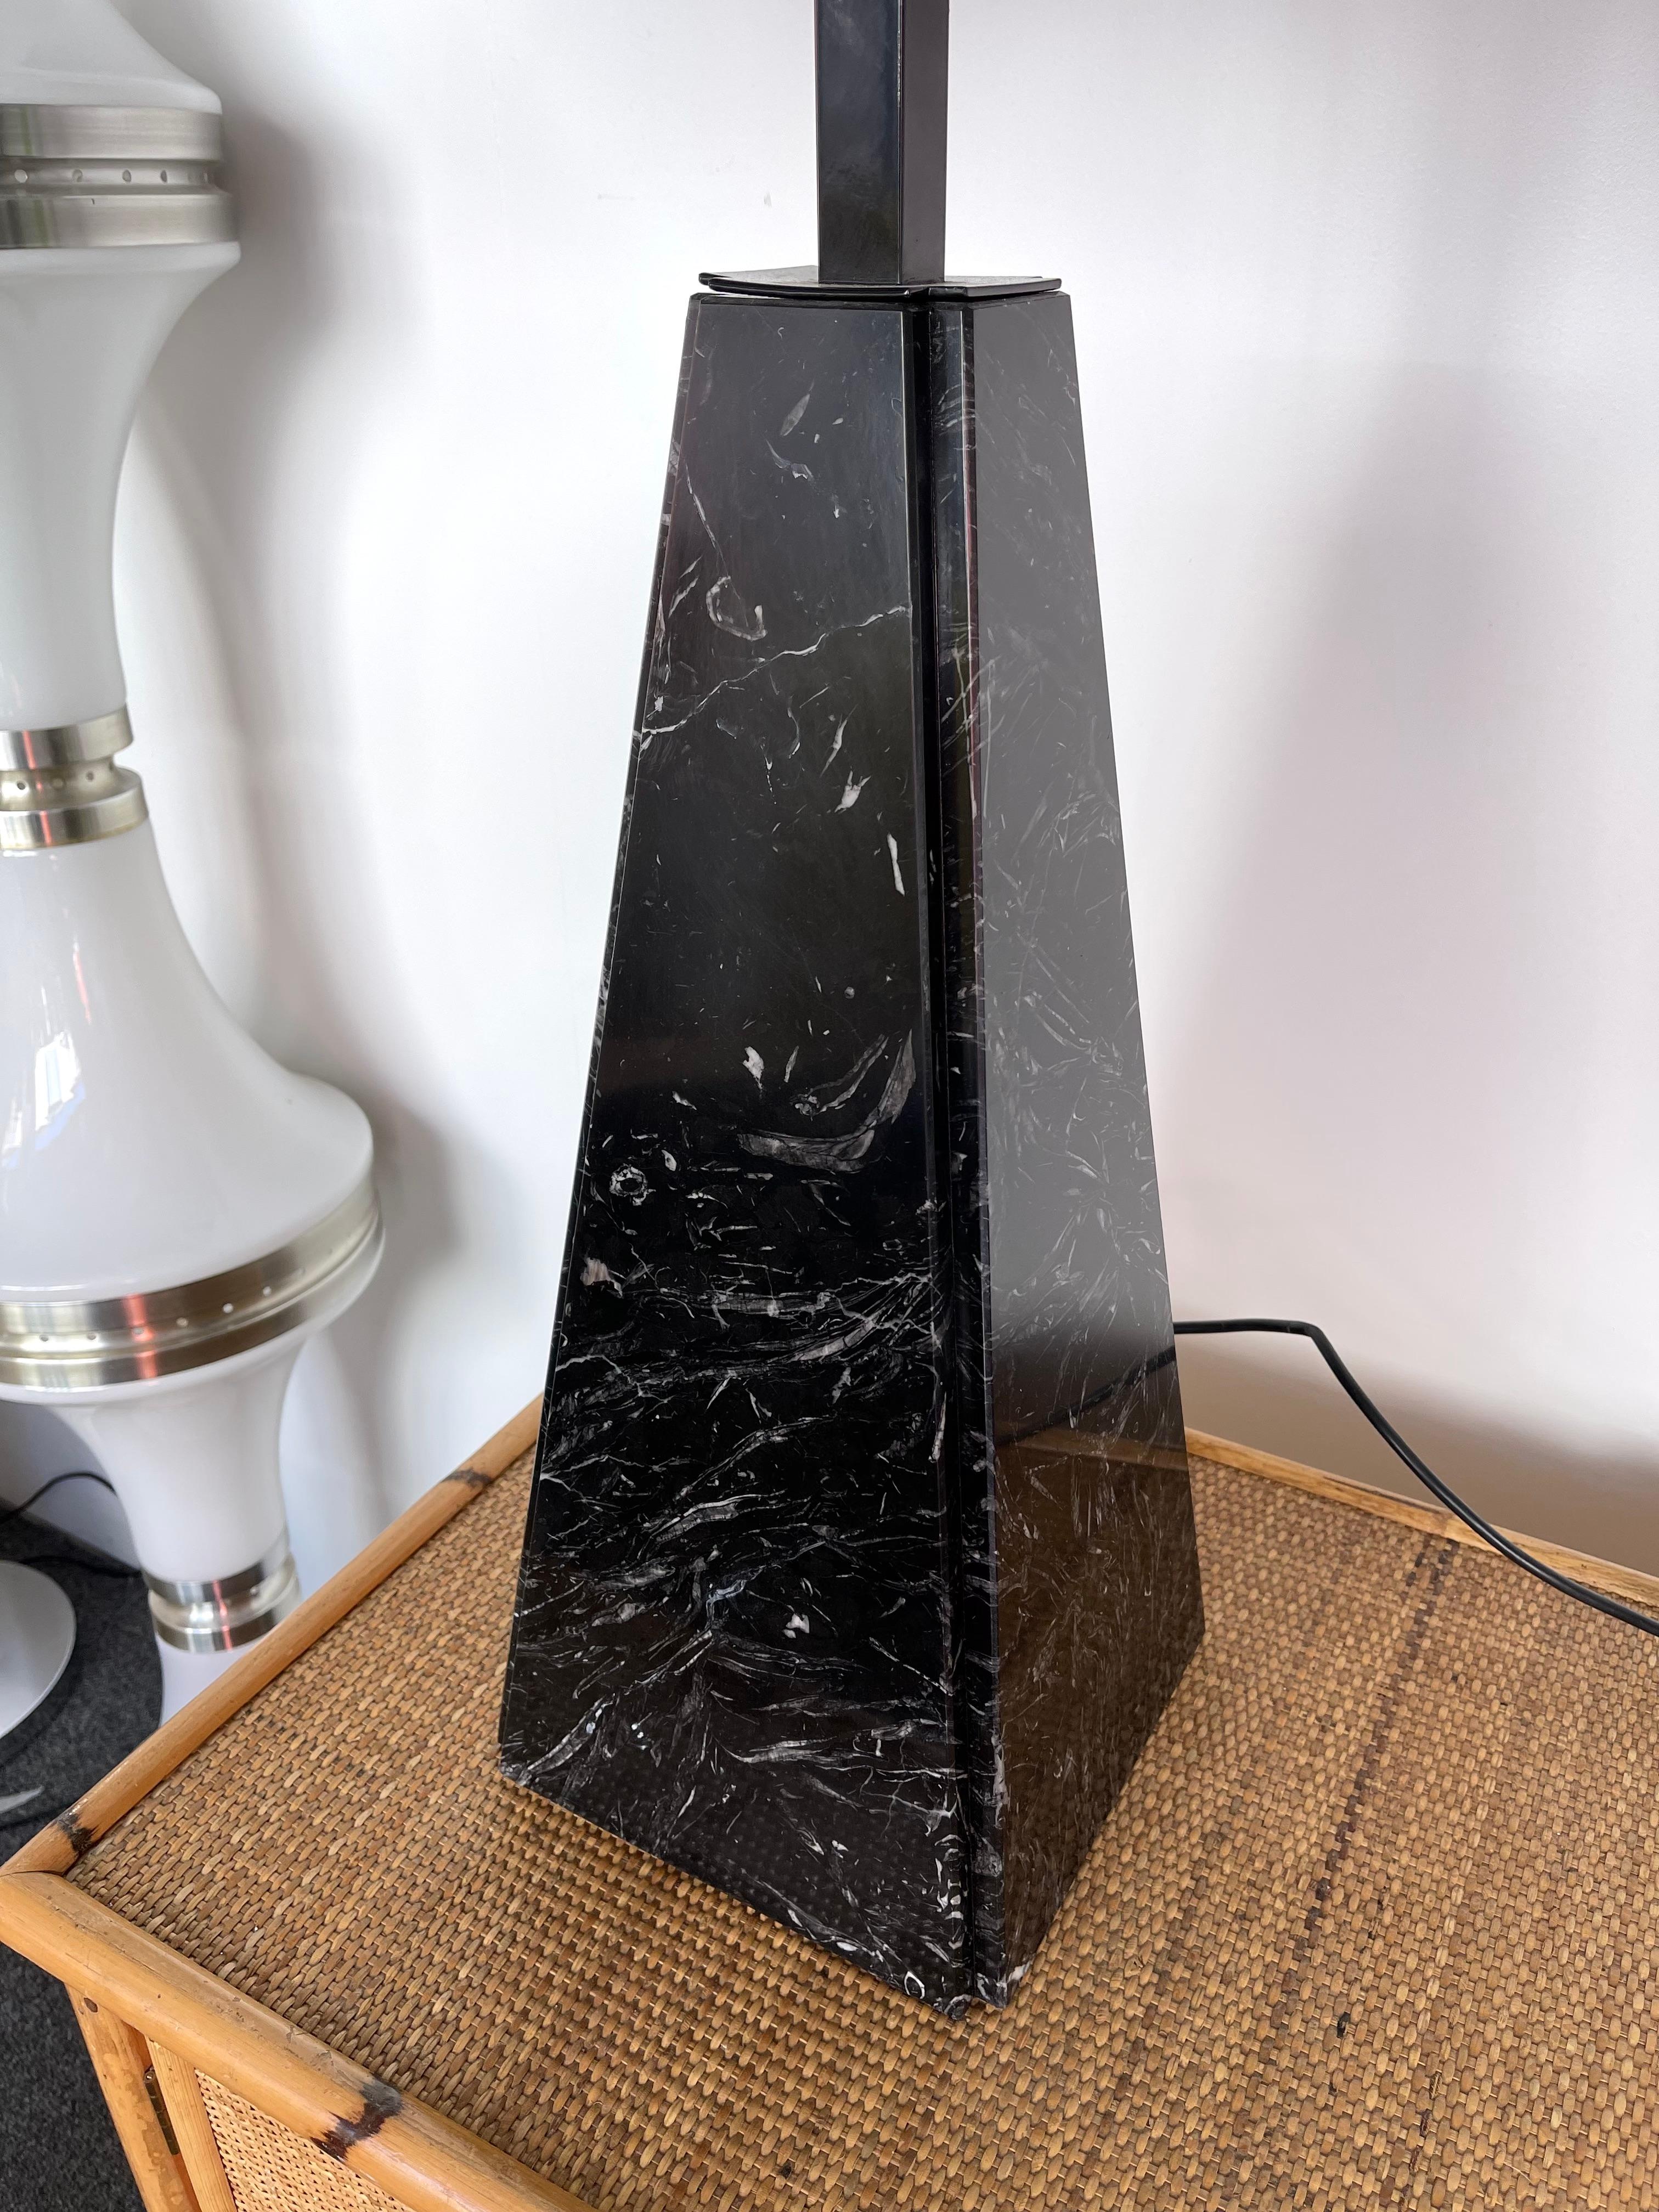 Mid-Century Modern Space Age Art Deco style Memphis Large Tall pair of table or bedside lamps in black marble, black lacquered metal and white lucite perspex methacrylate. Model Abat Jour by the italian designer Cini Boeri for the editor Tronconi.